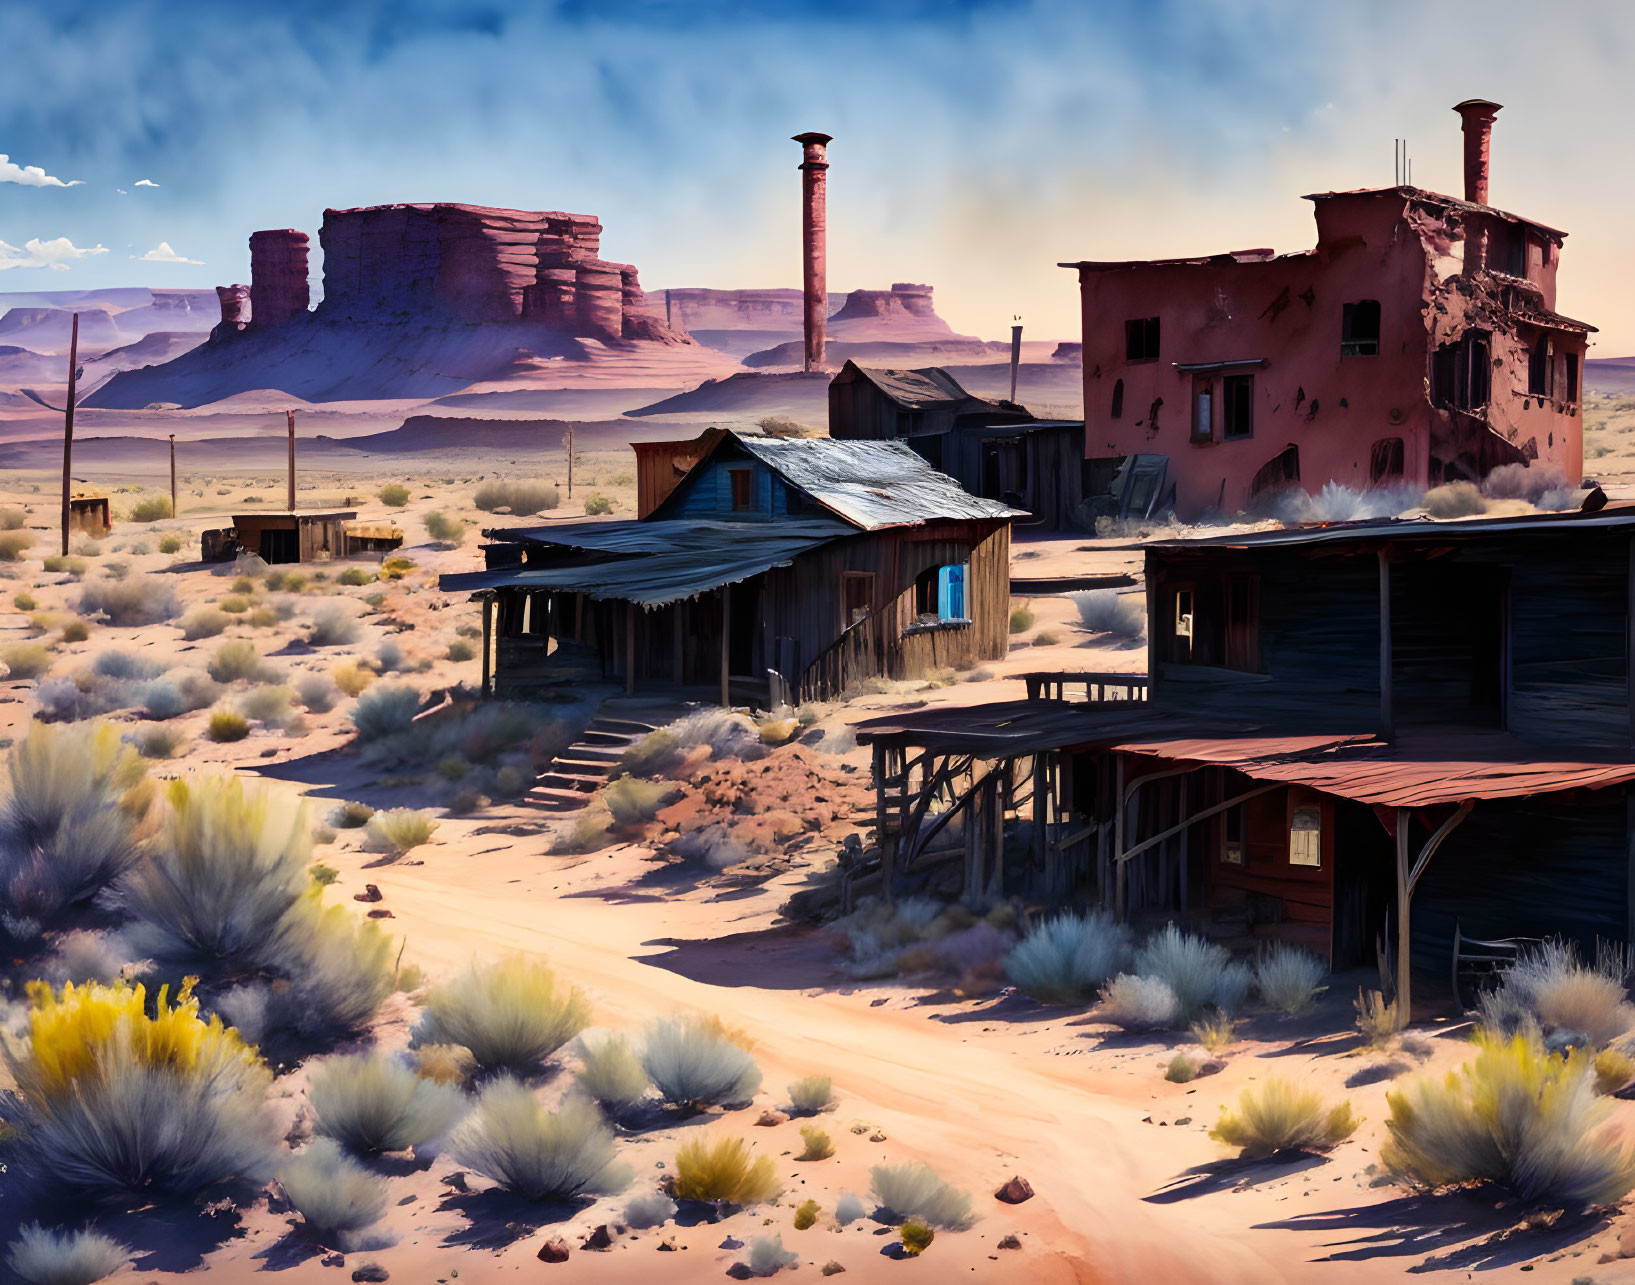 Deserted Western Town with Red Rock Formations and Wooden Structures